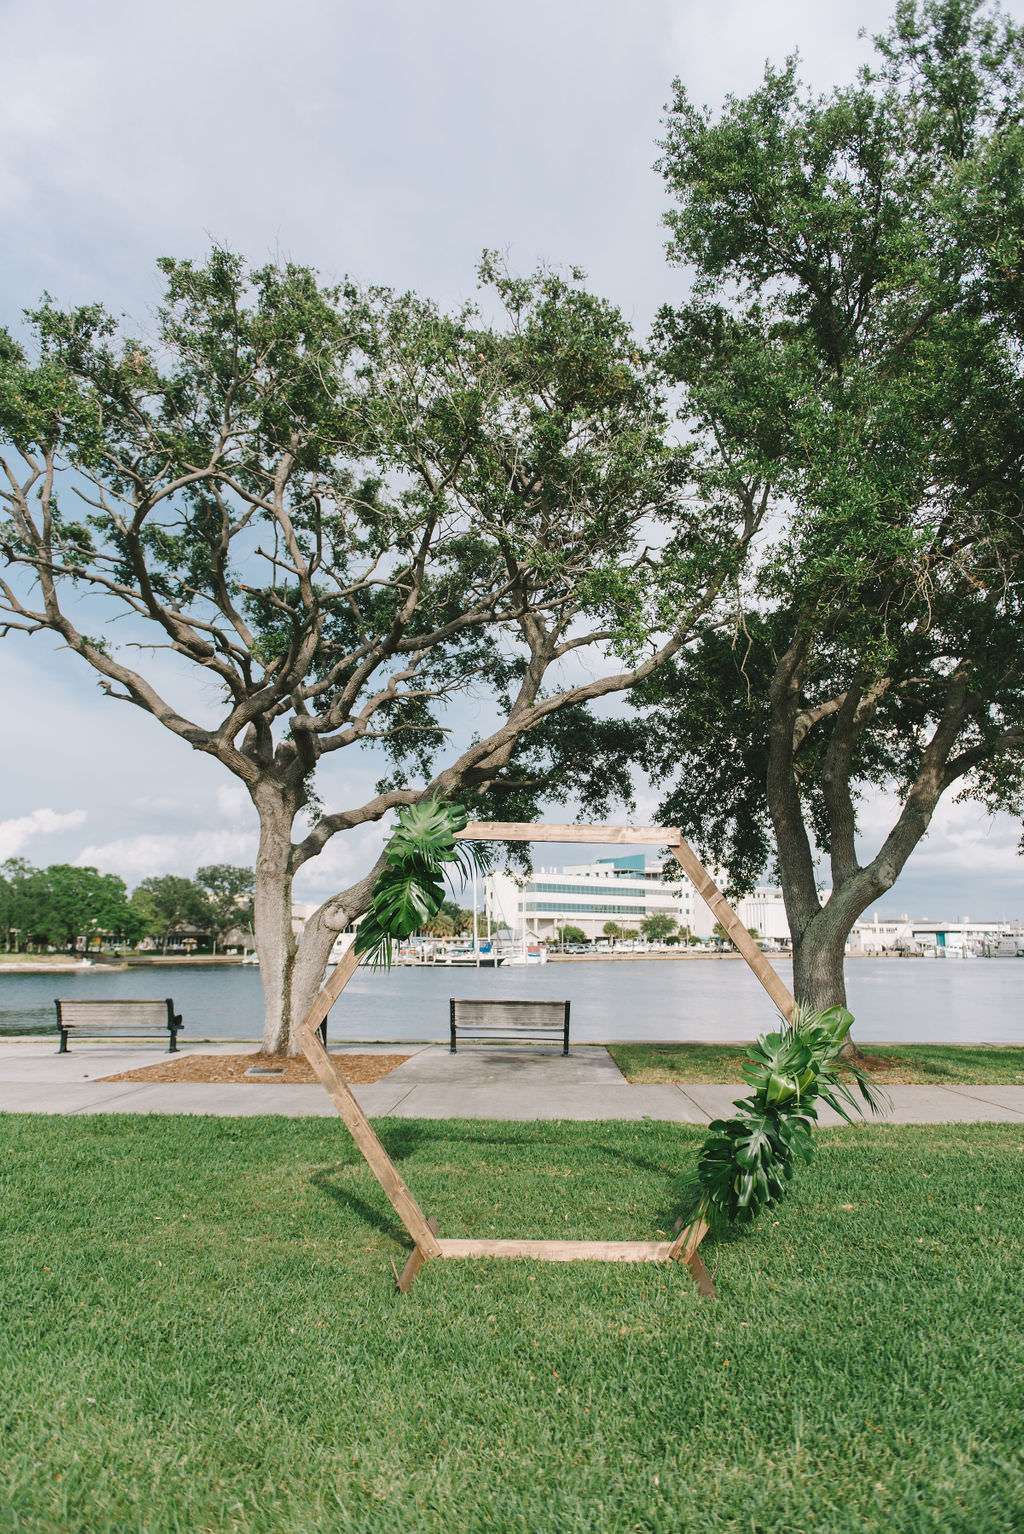 Modern, Simple Unique Outdoor Waterfront Wedding Ceremony Decor, Geometric Wooden Arch with Tropical Monstera Palm Leaves | Wedding Photographer Kera Photography | St. Petersburg Wedding Venue The Poynter Institute